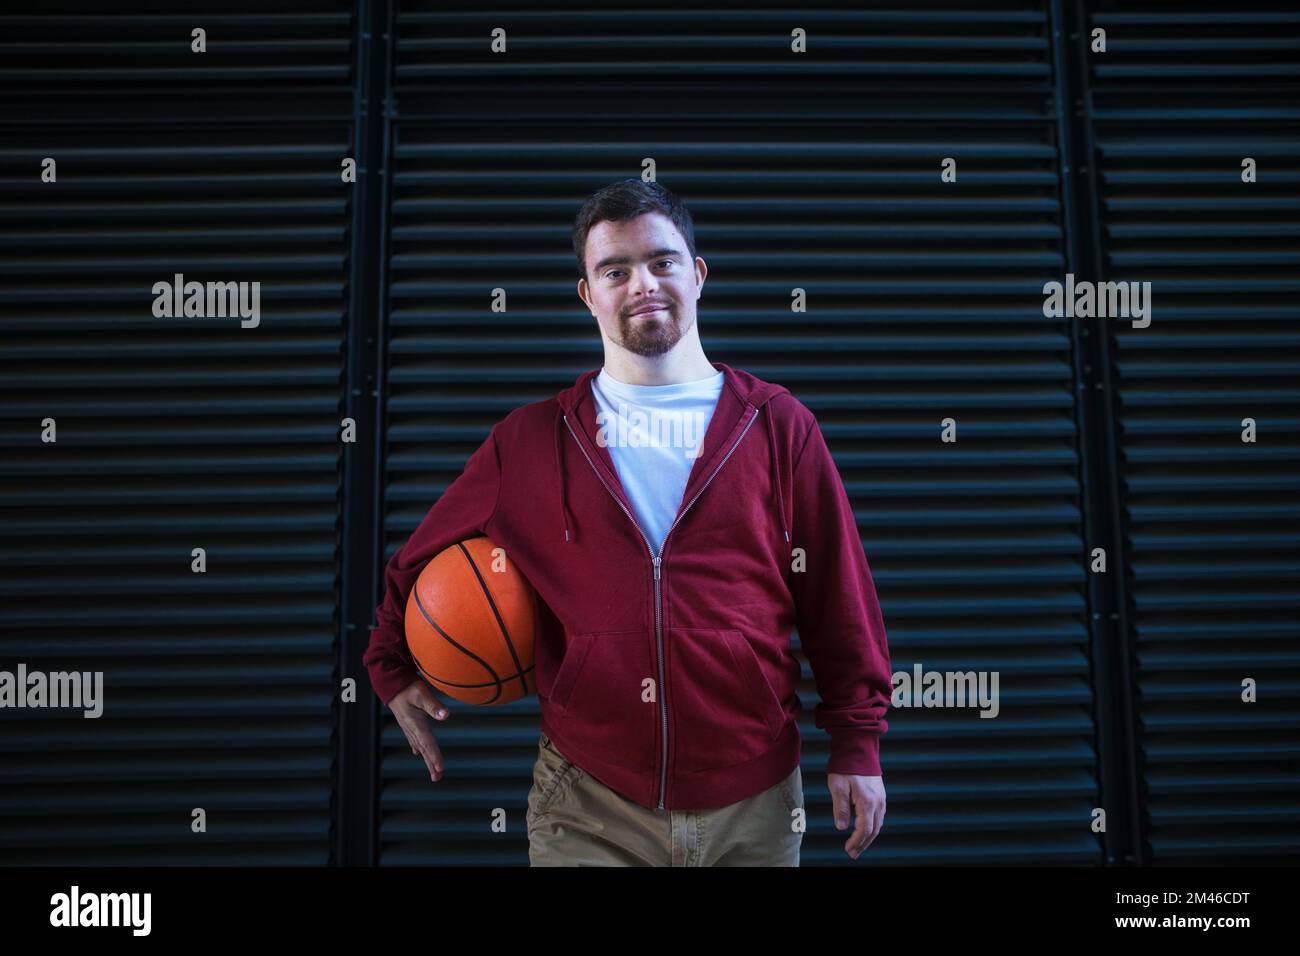 Portrait of young man with down syndrom holding basketball ball. Stock Photo